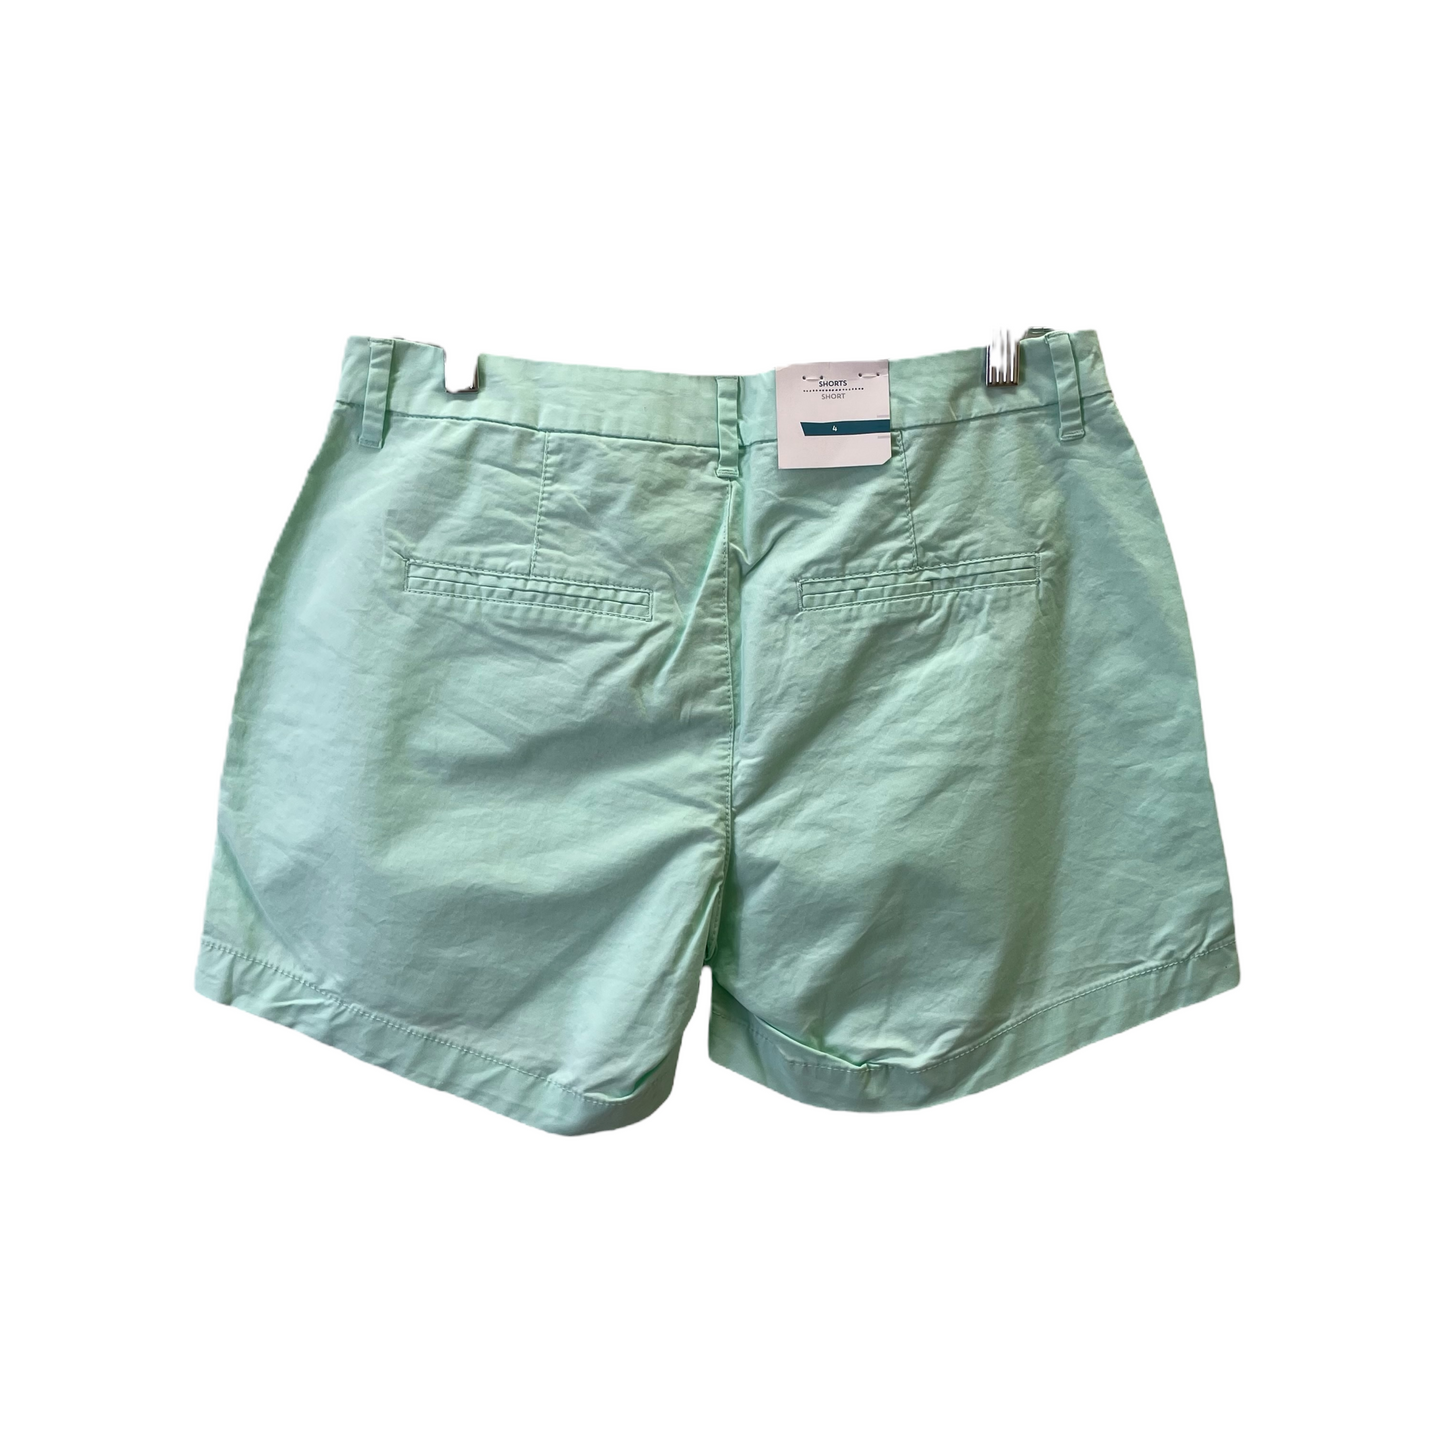 Green Shorts By Old Navy, Size: 4